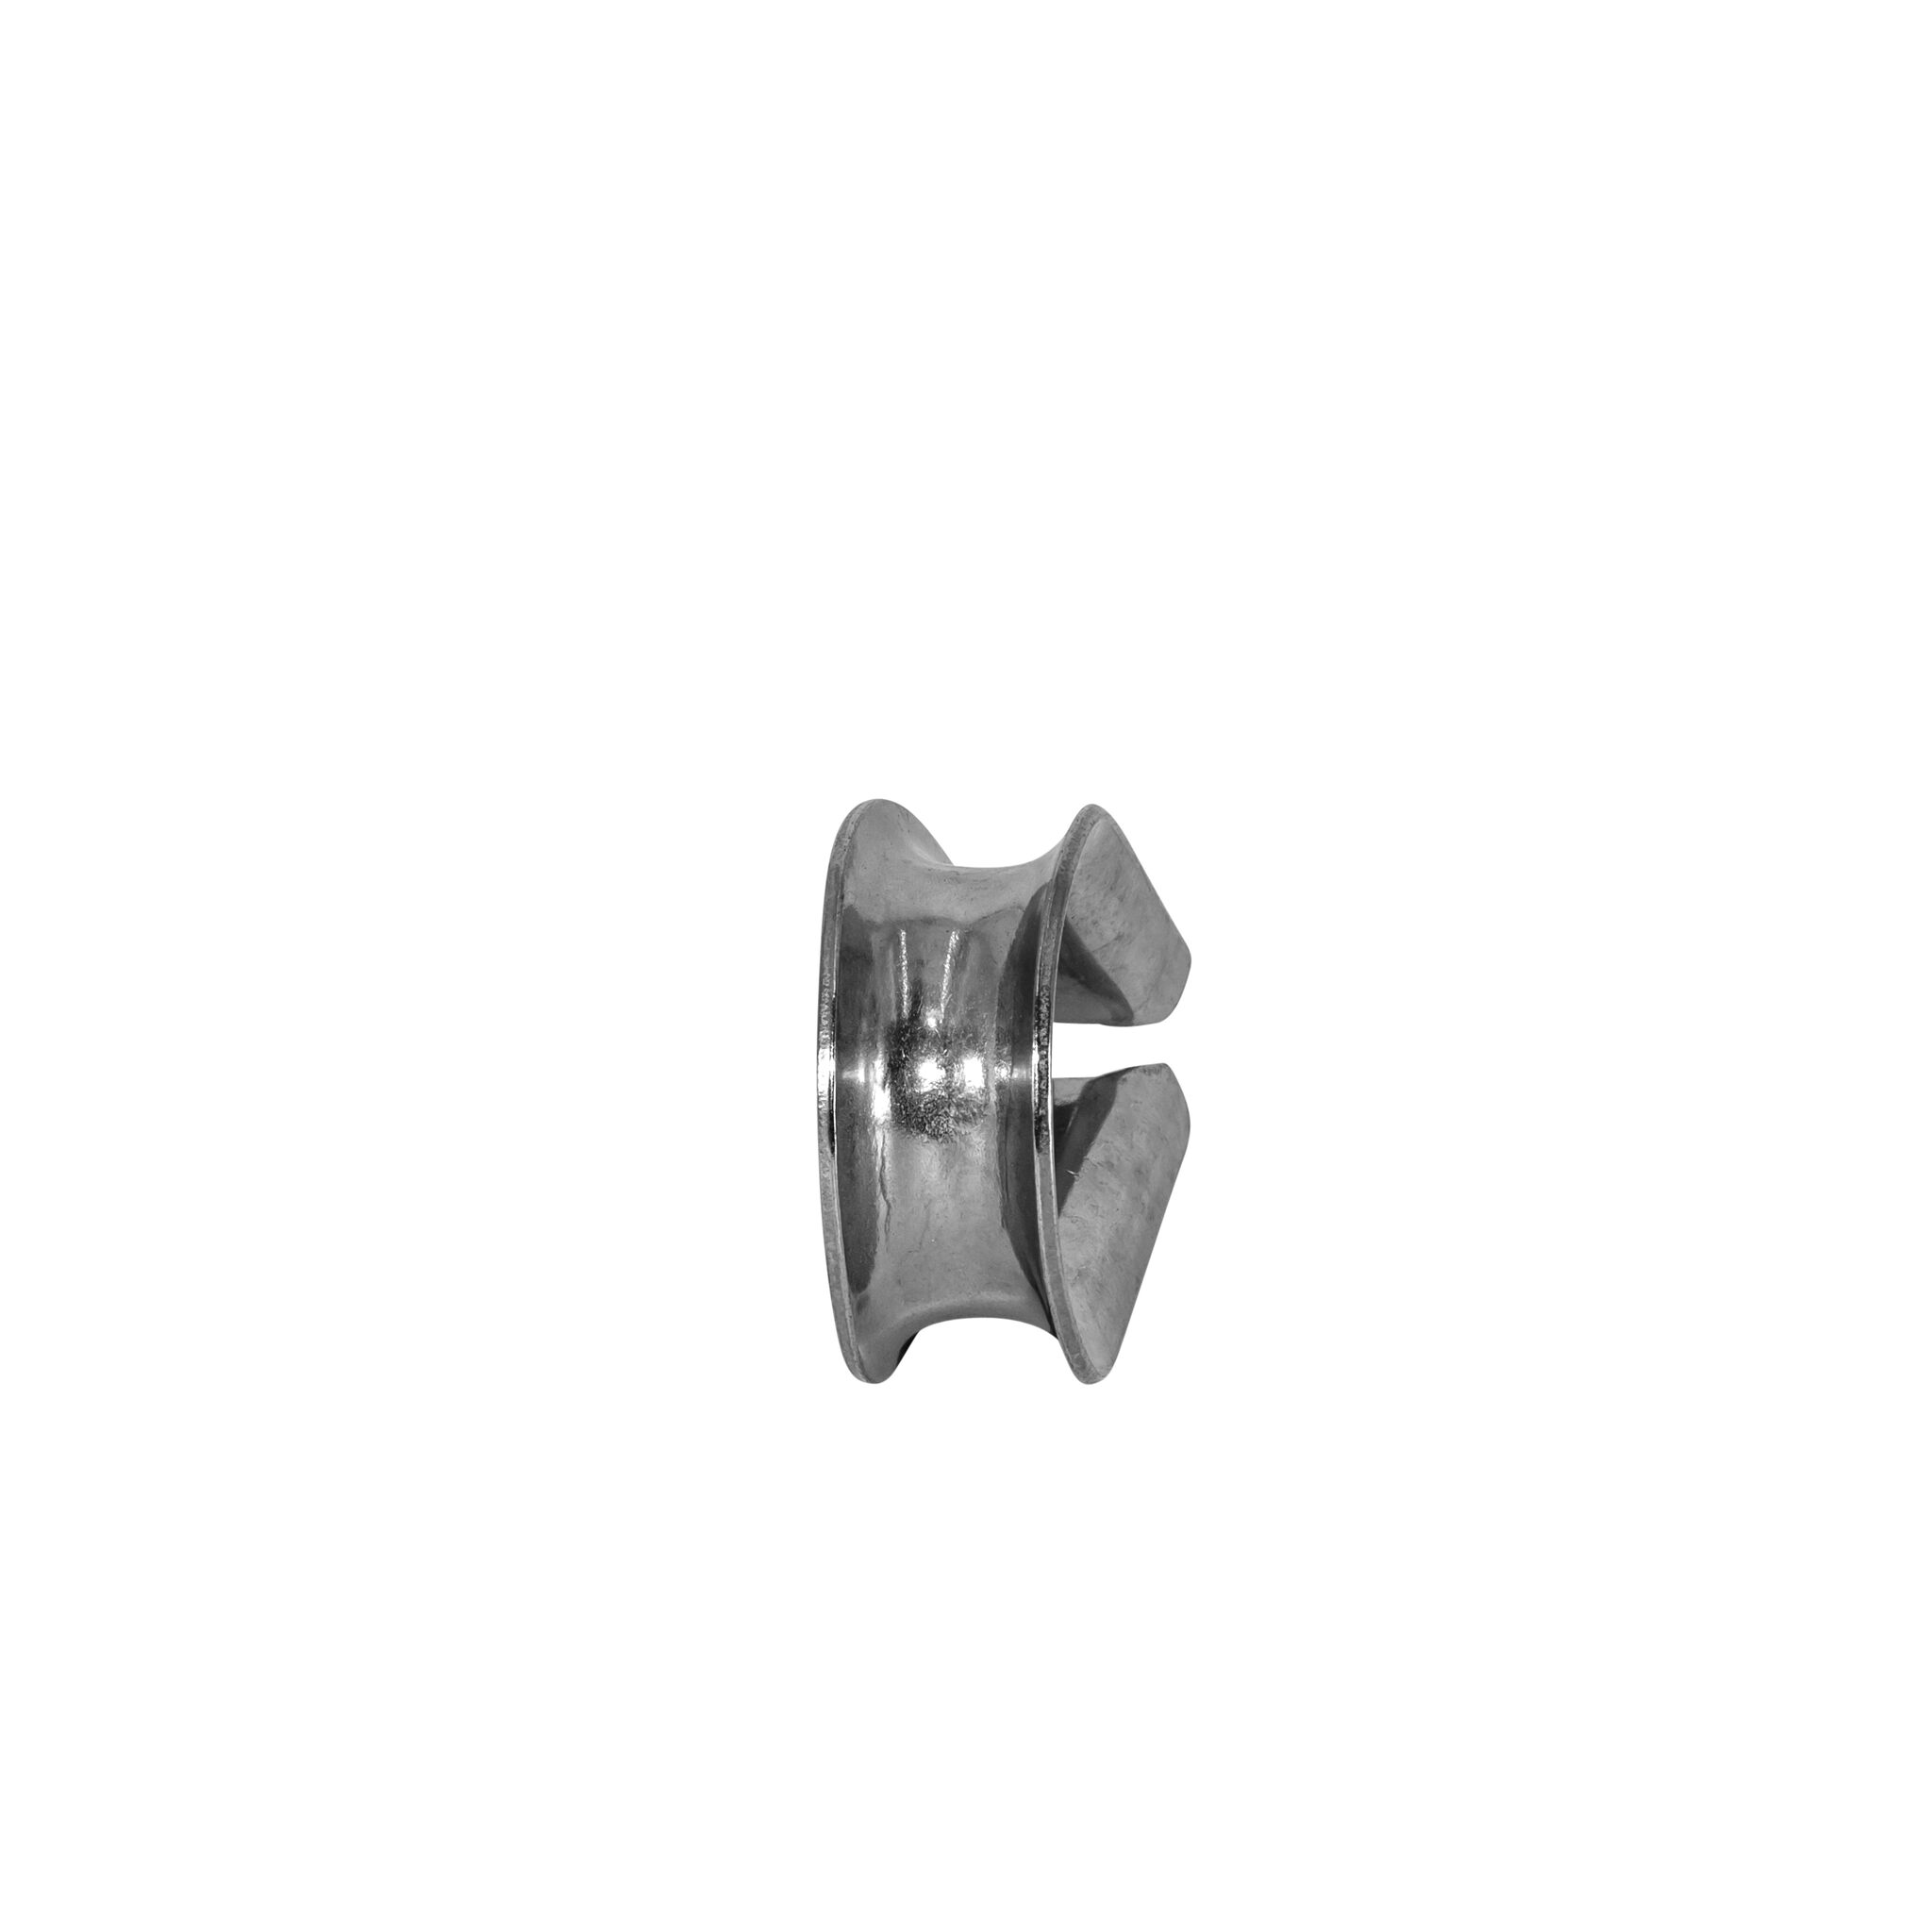 Pointed thimble, V4A steel